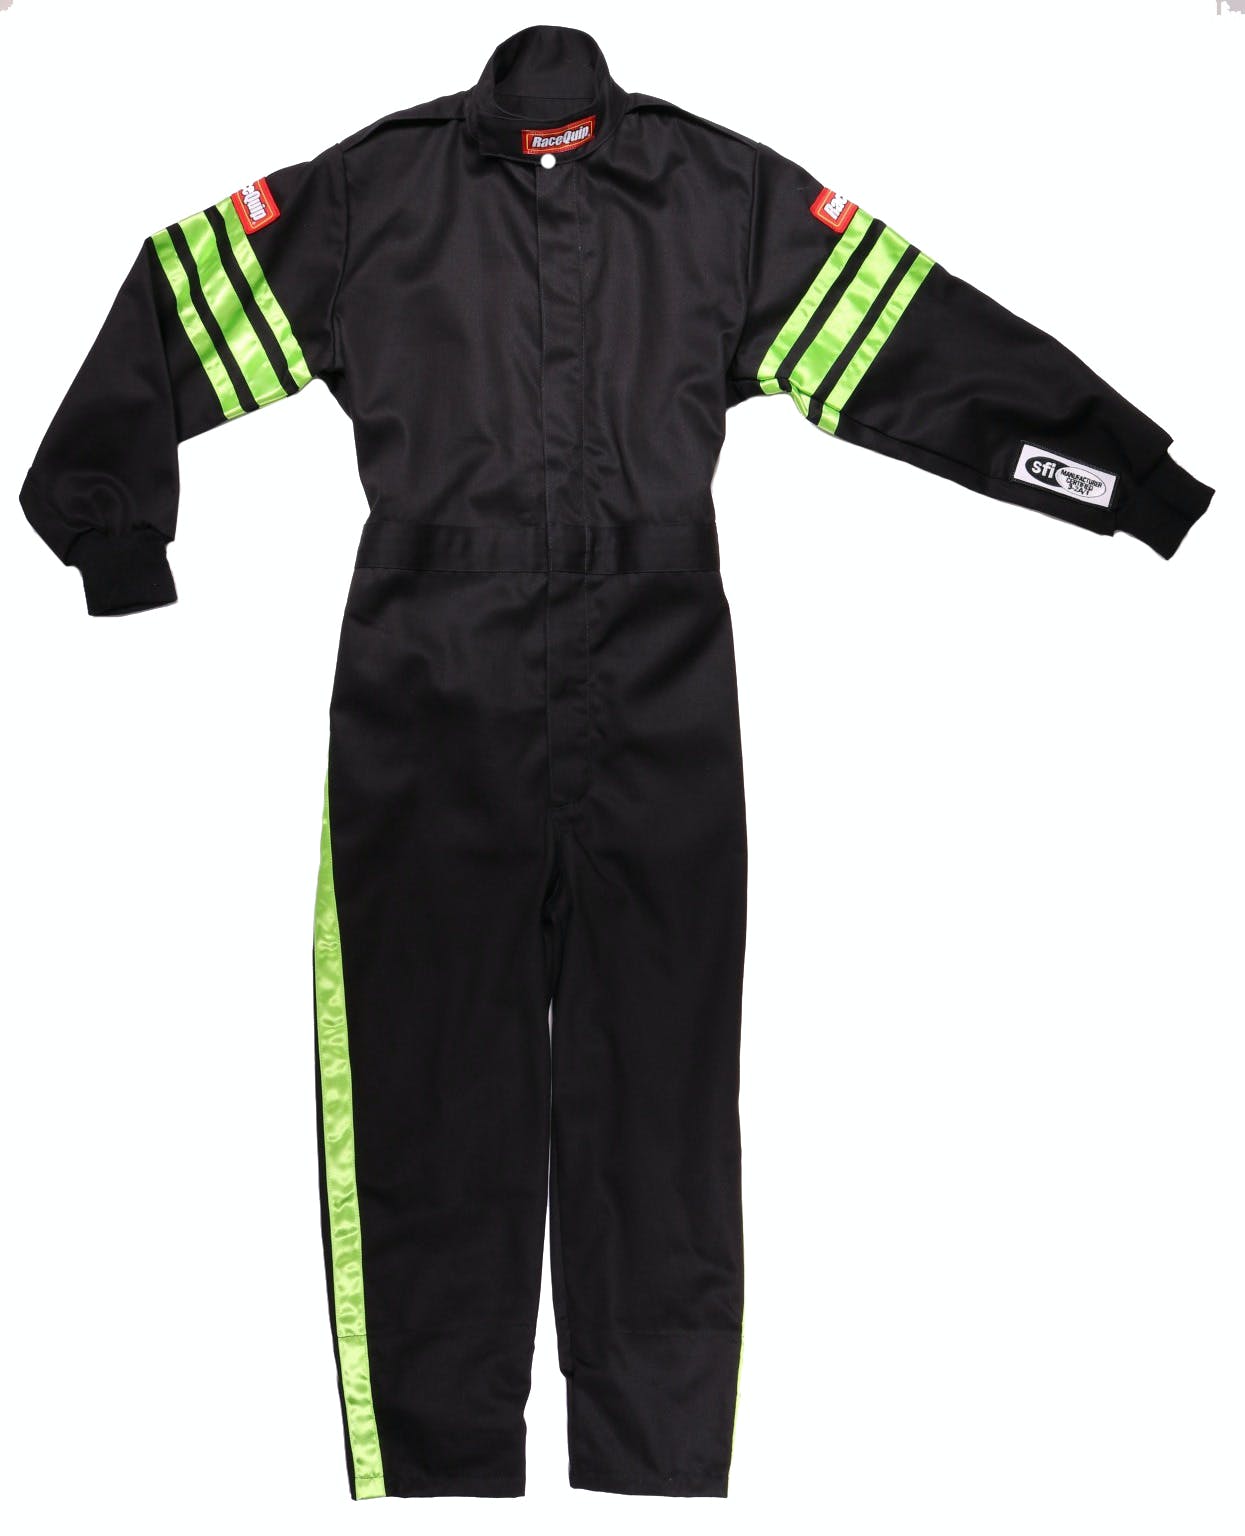 RaceQuip 1950792 SFI-1 Pyrovatex One-Piece Single-Layer Youth Racing Fire Suit (Black/Green-S)